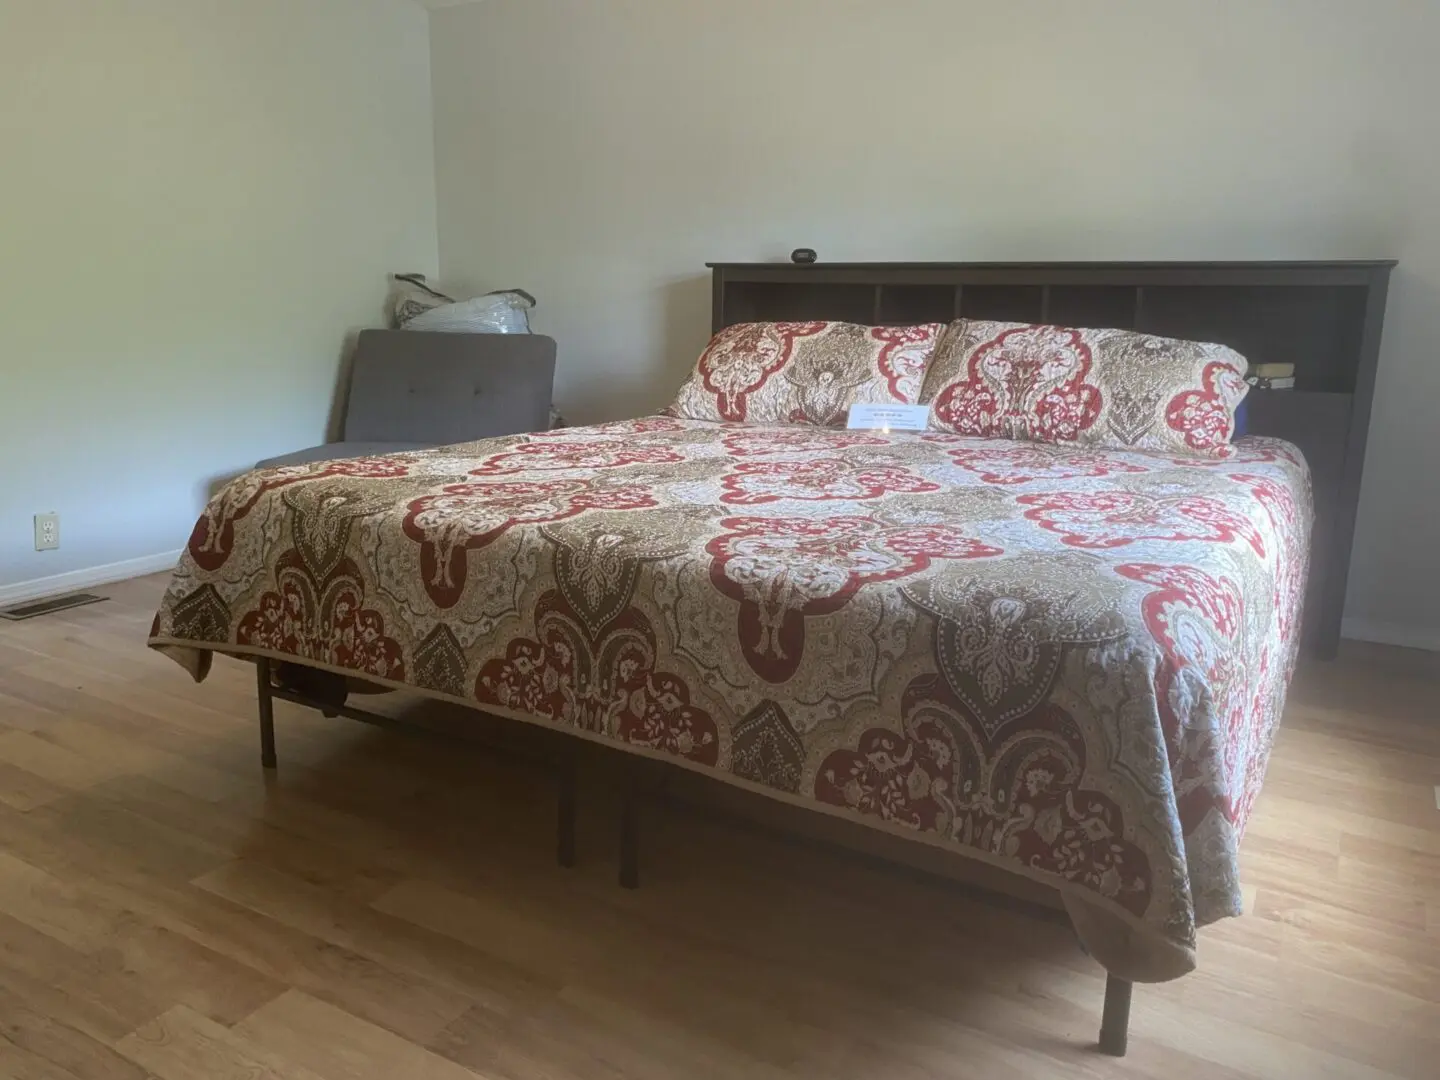 A bed with a red and white bedspread on it